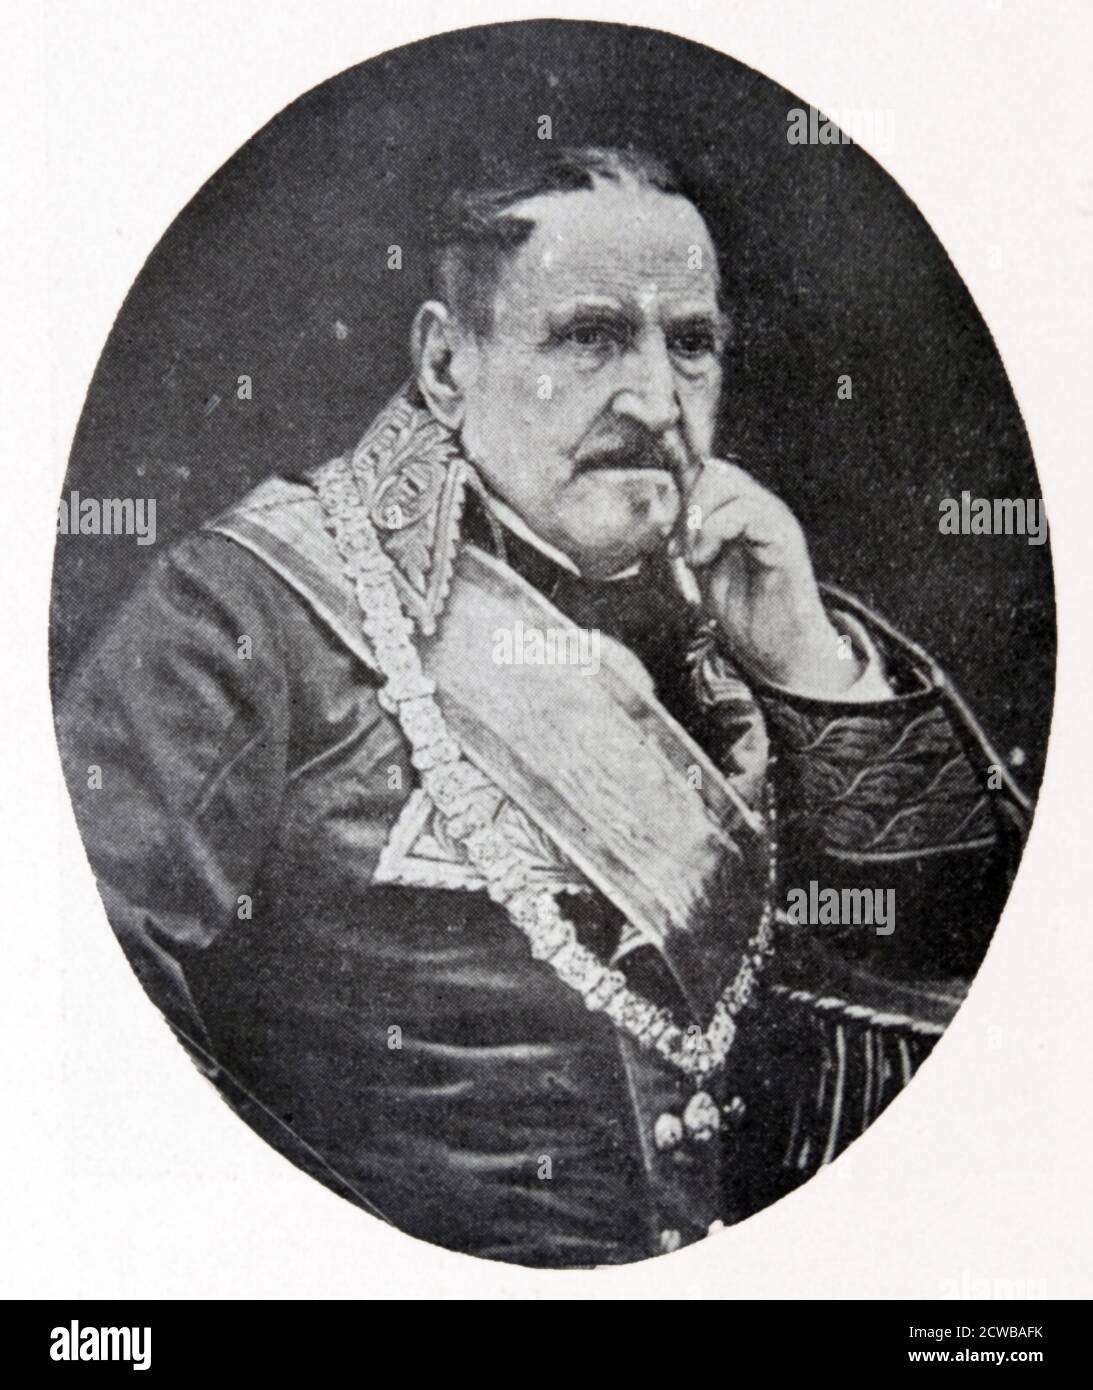 Joaquin Baldomero Fernandez-Espartero, Prince of Vergara, Duke of la Victoria, (1793 - 1879); Spanish general and politician, who served as the Regent of Spain. He also served as Prime Minister of Spain three times. He was associated with the radical (or progressive) faction of Spanish liberalism and would become their symbol and champion after taking credit for the victory over the Carlists during 1839. His noble title, Duke of La Victoria was granted by Isabella II to him as a result. Stock Photo